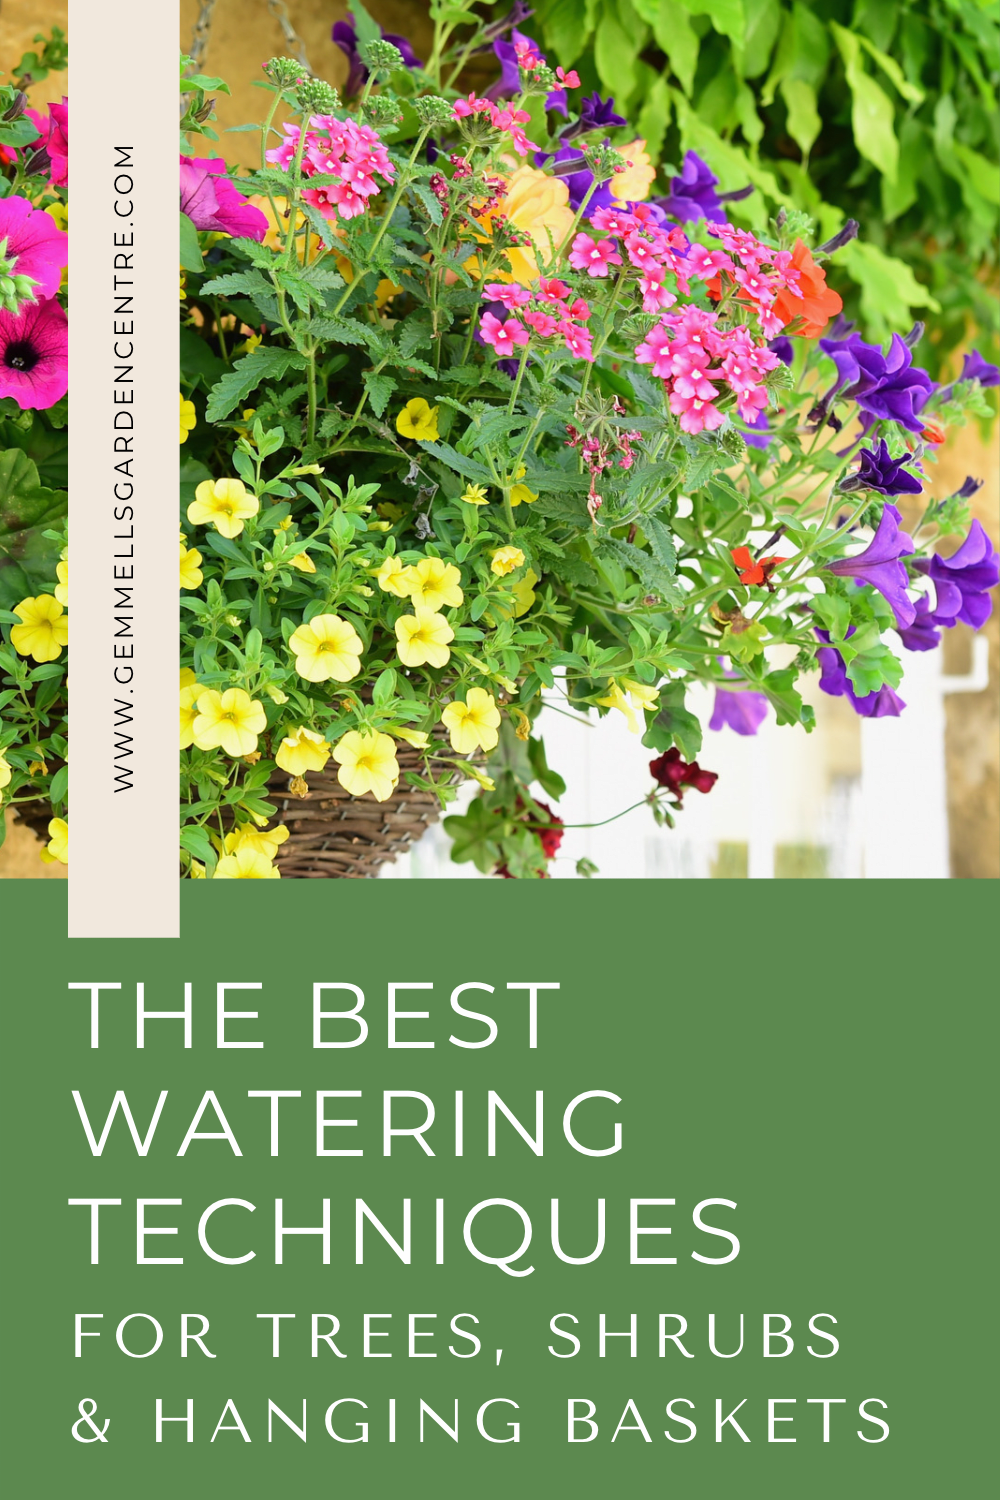 Proper Watering Techniques for your Trees, Shrubs & Hanging Baskets